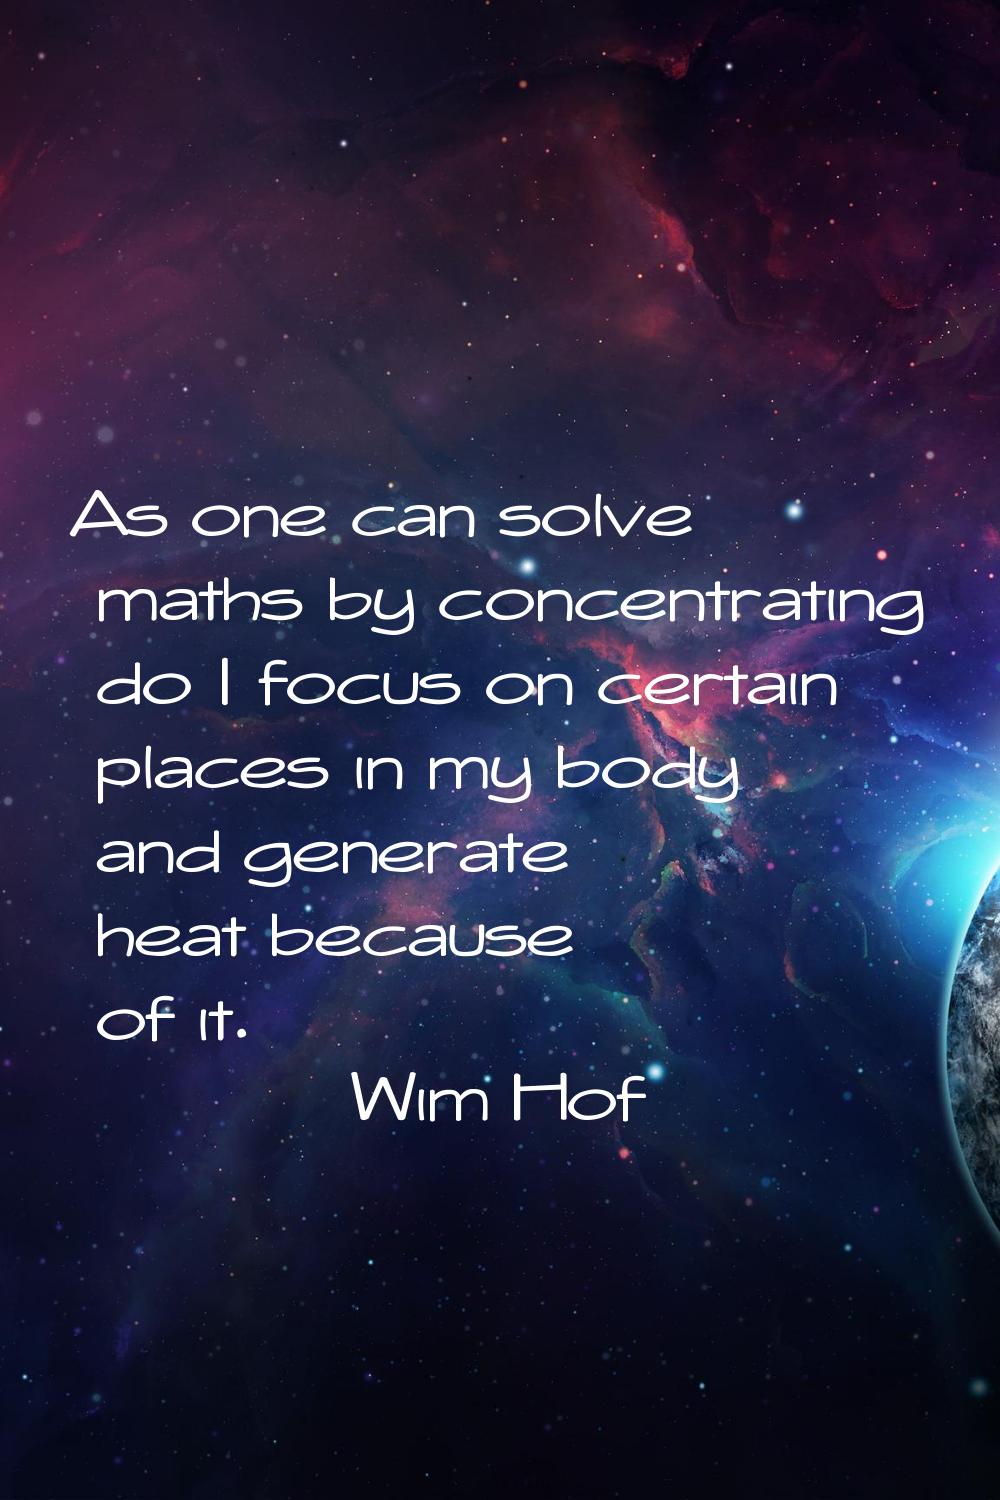 As one can solve maths by concentrating do I focus on certain places in my body and generate heat b